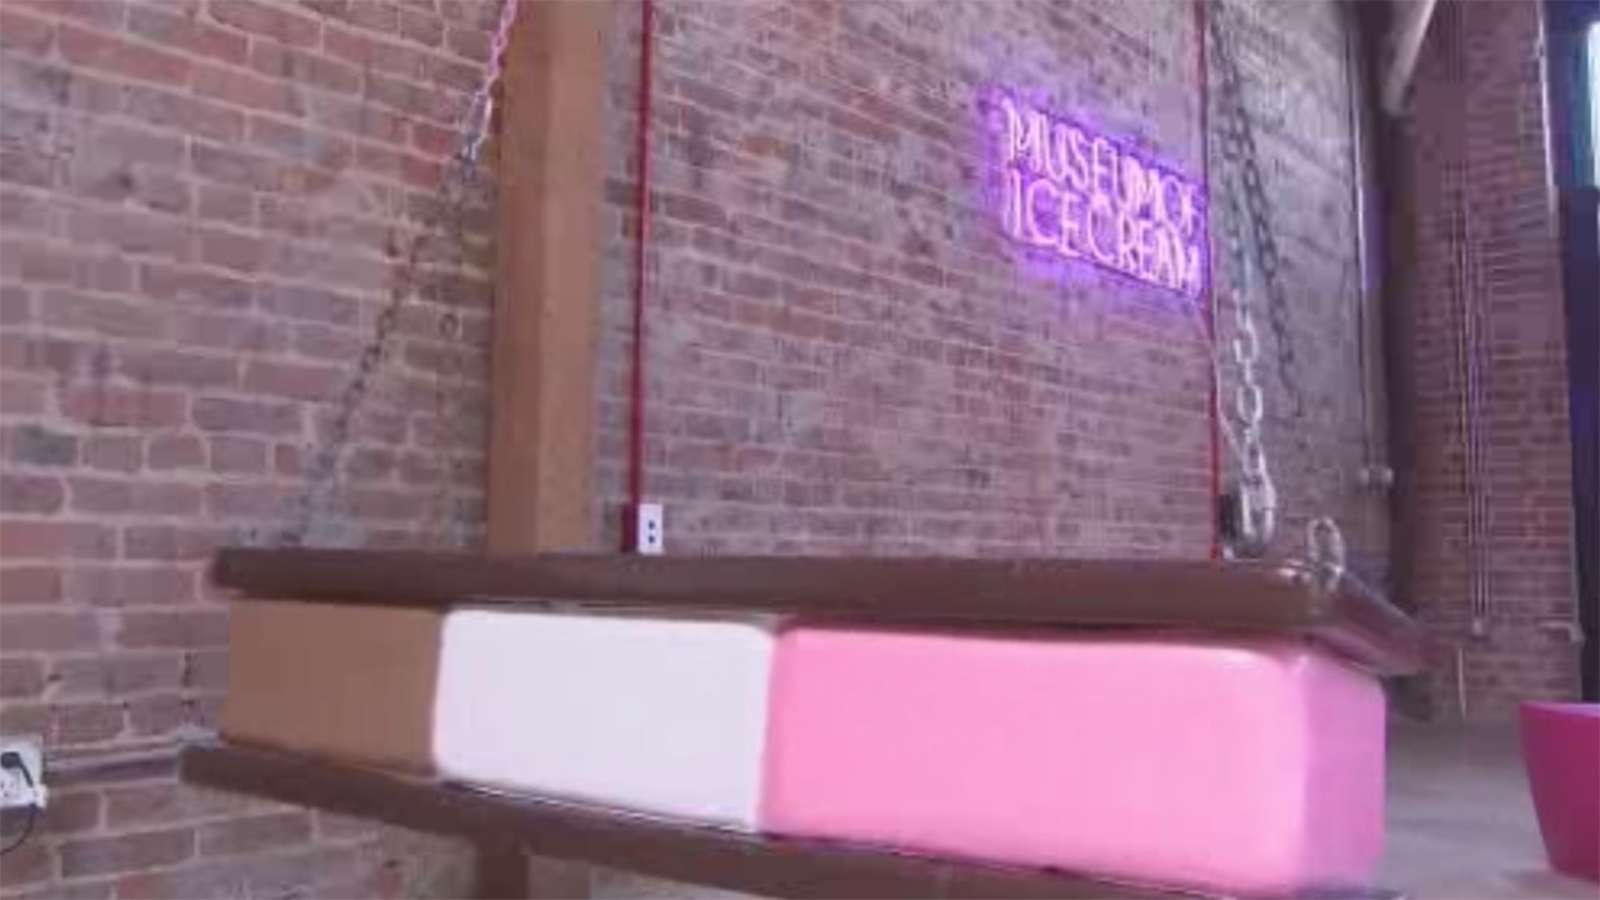 Tickets sellout for Museum of Ice Cream in San Francisco ...